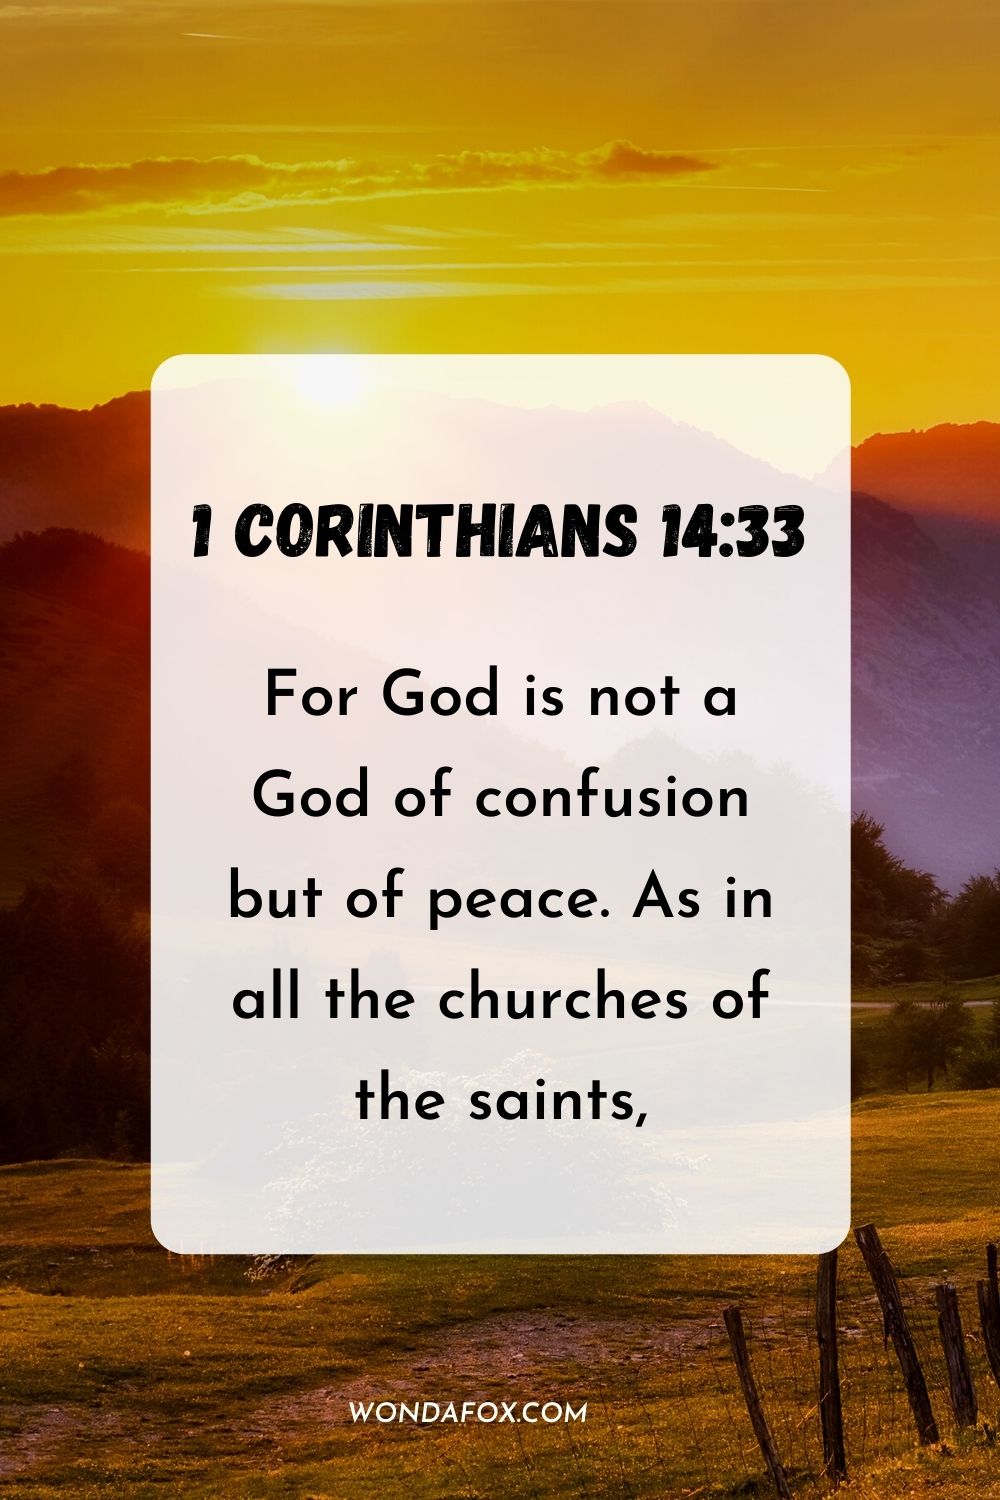 For God is not a God of confusion but of peace. As in all the churches of the saints, 1 Corinthians 14:33